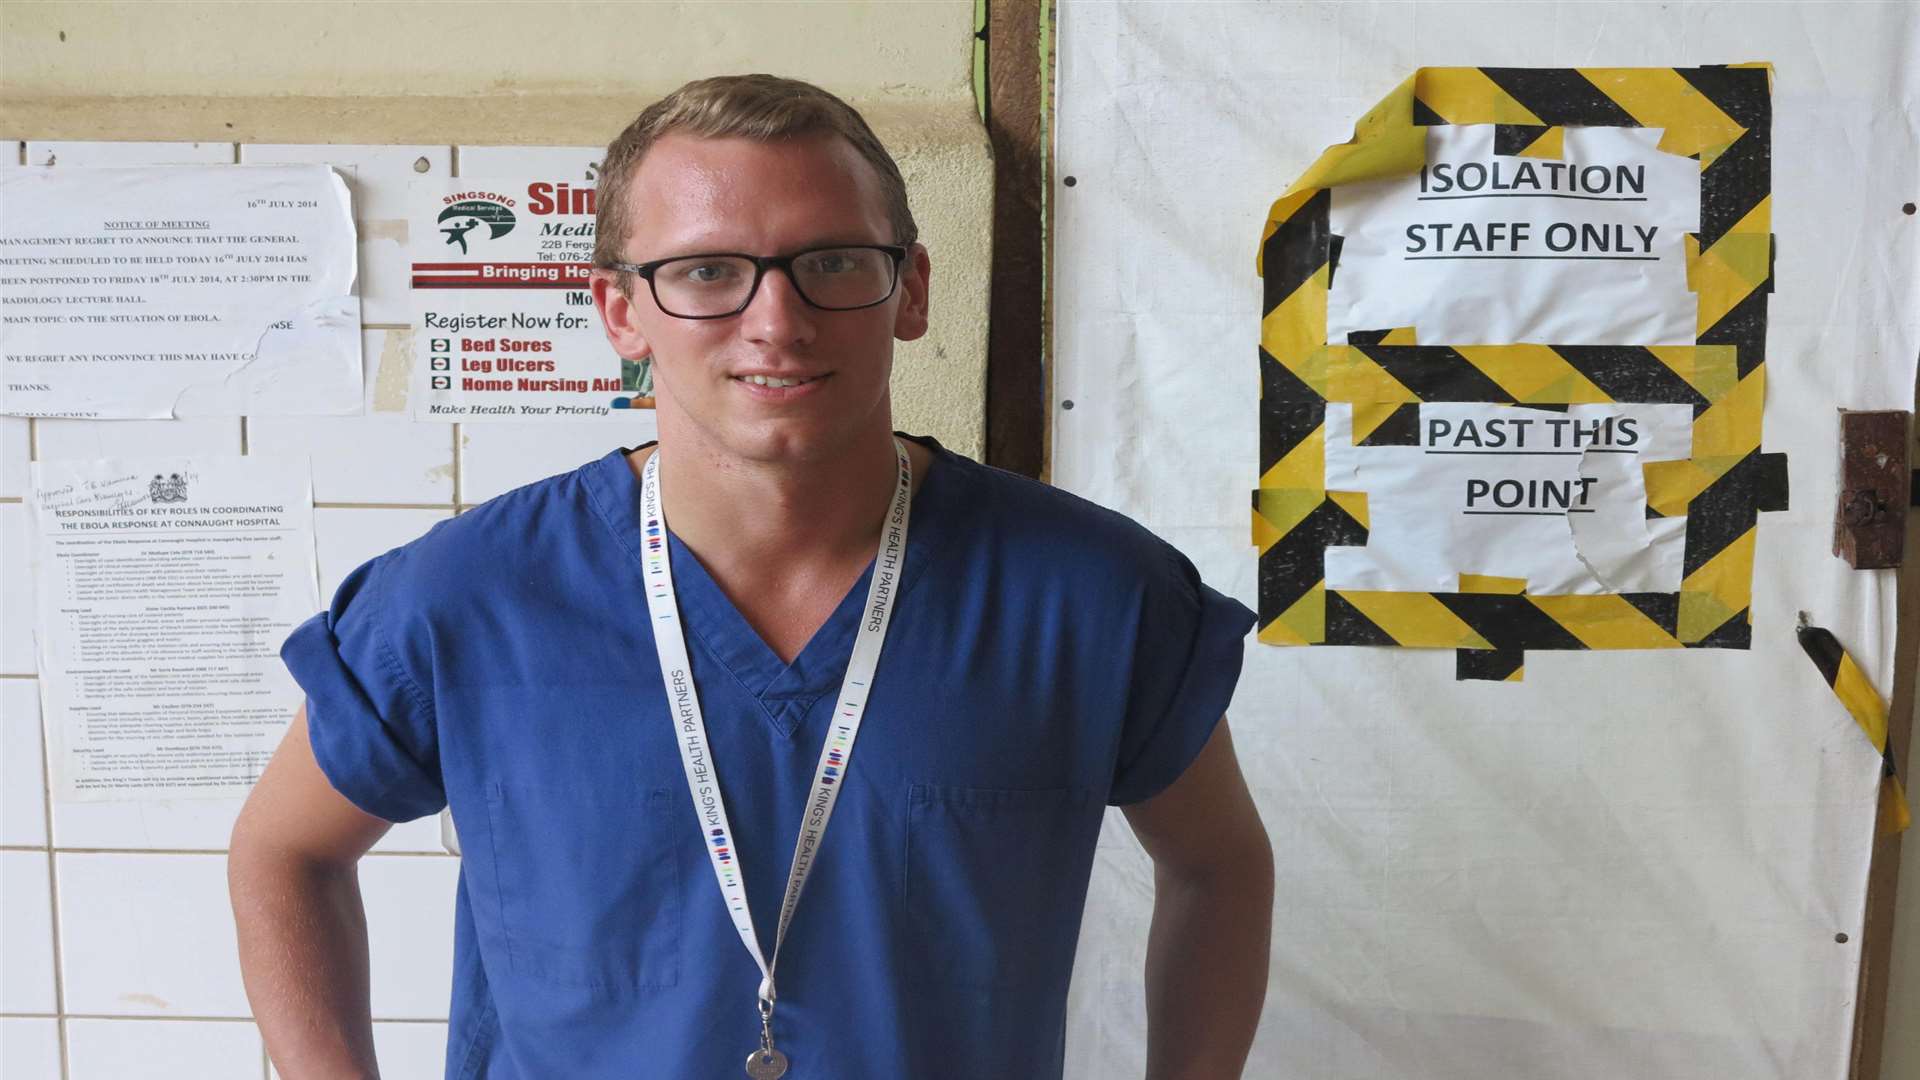 Andy Hall has also been helping Ebola victims in Sierra Leone